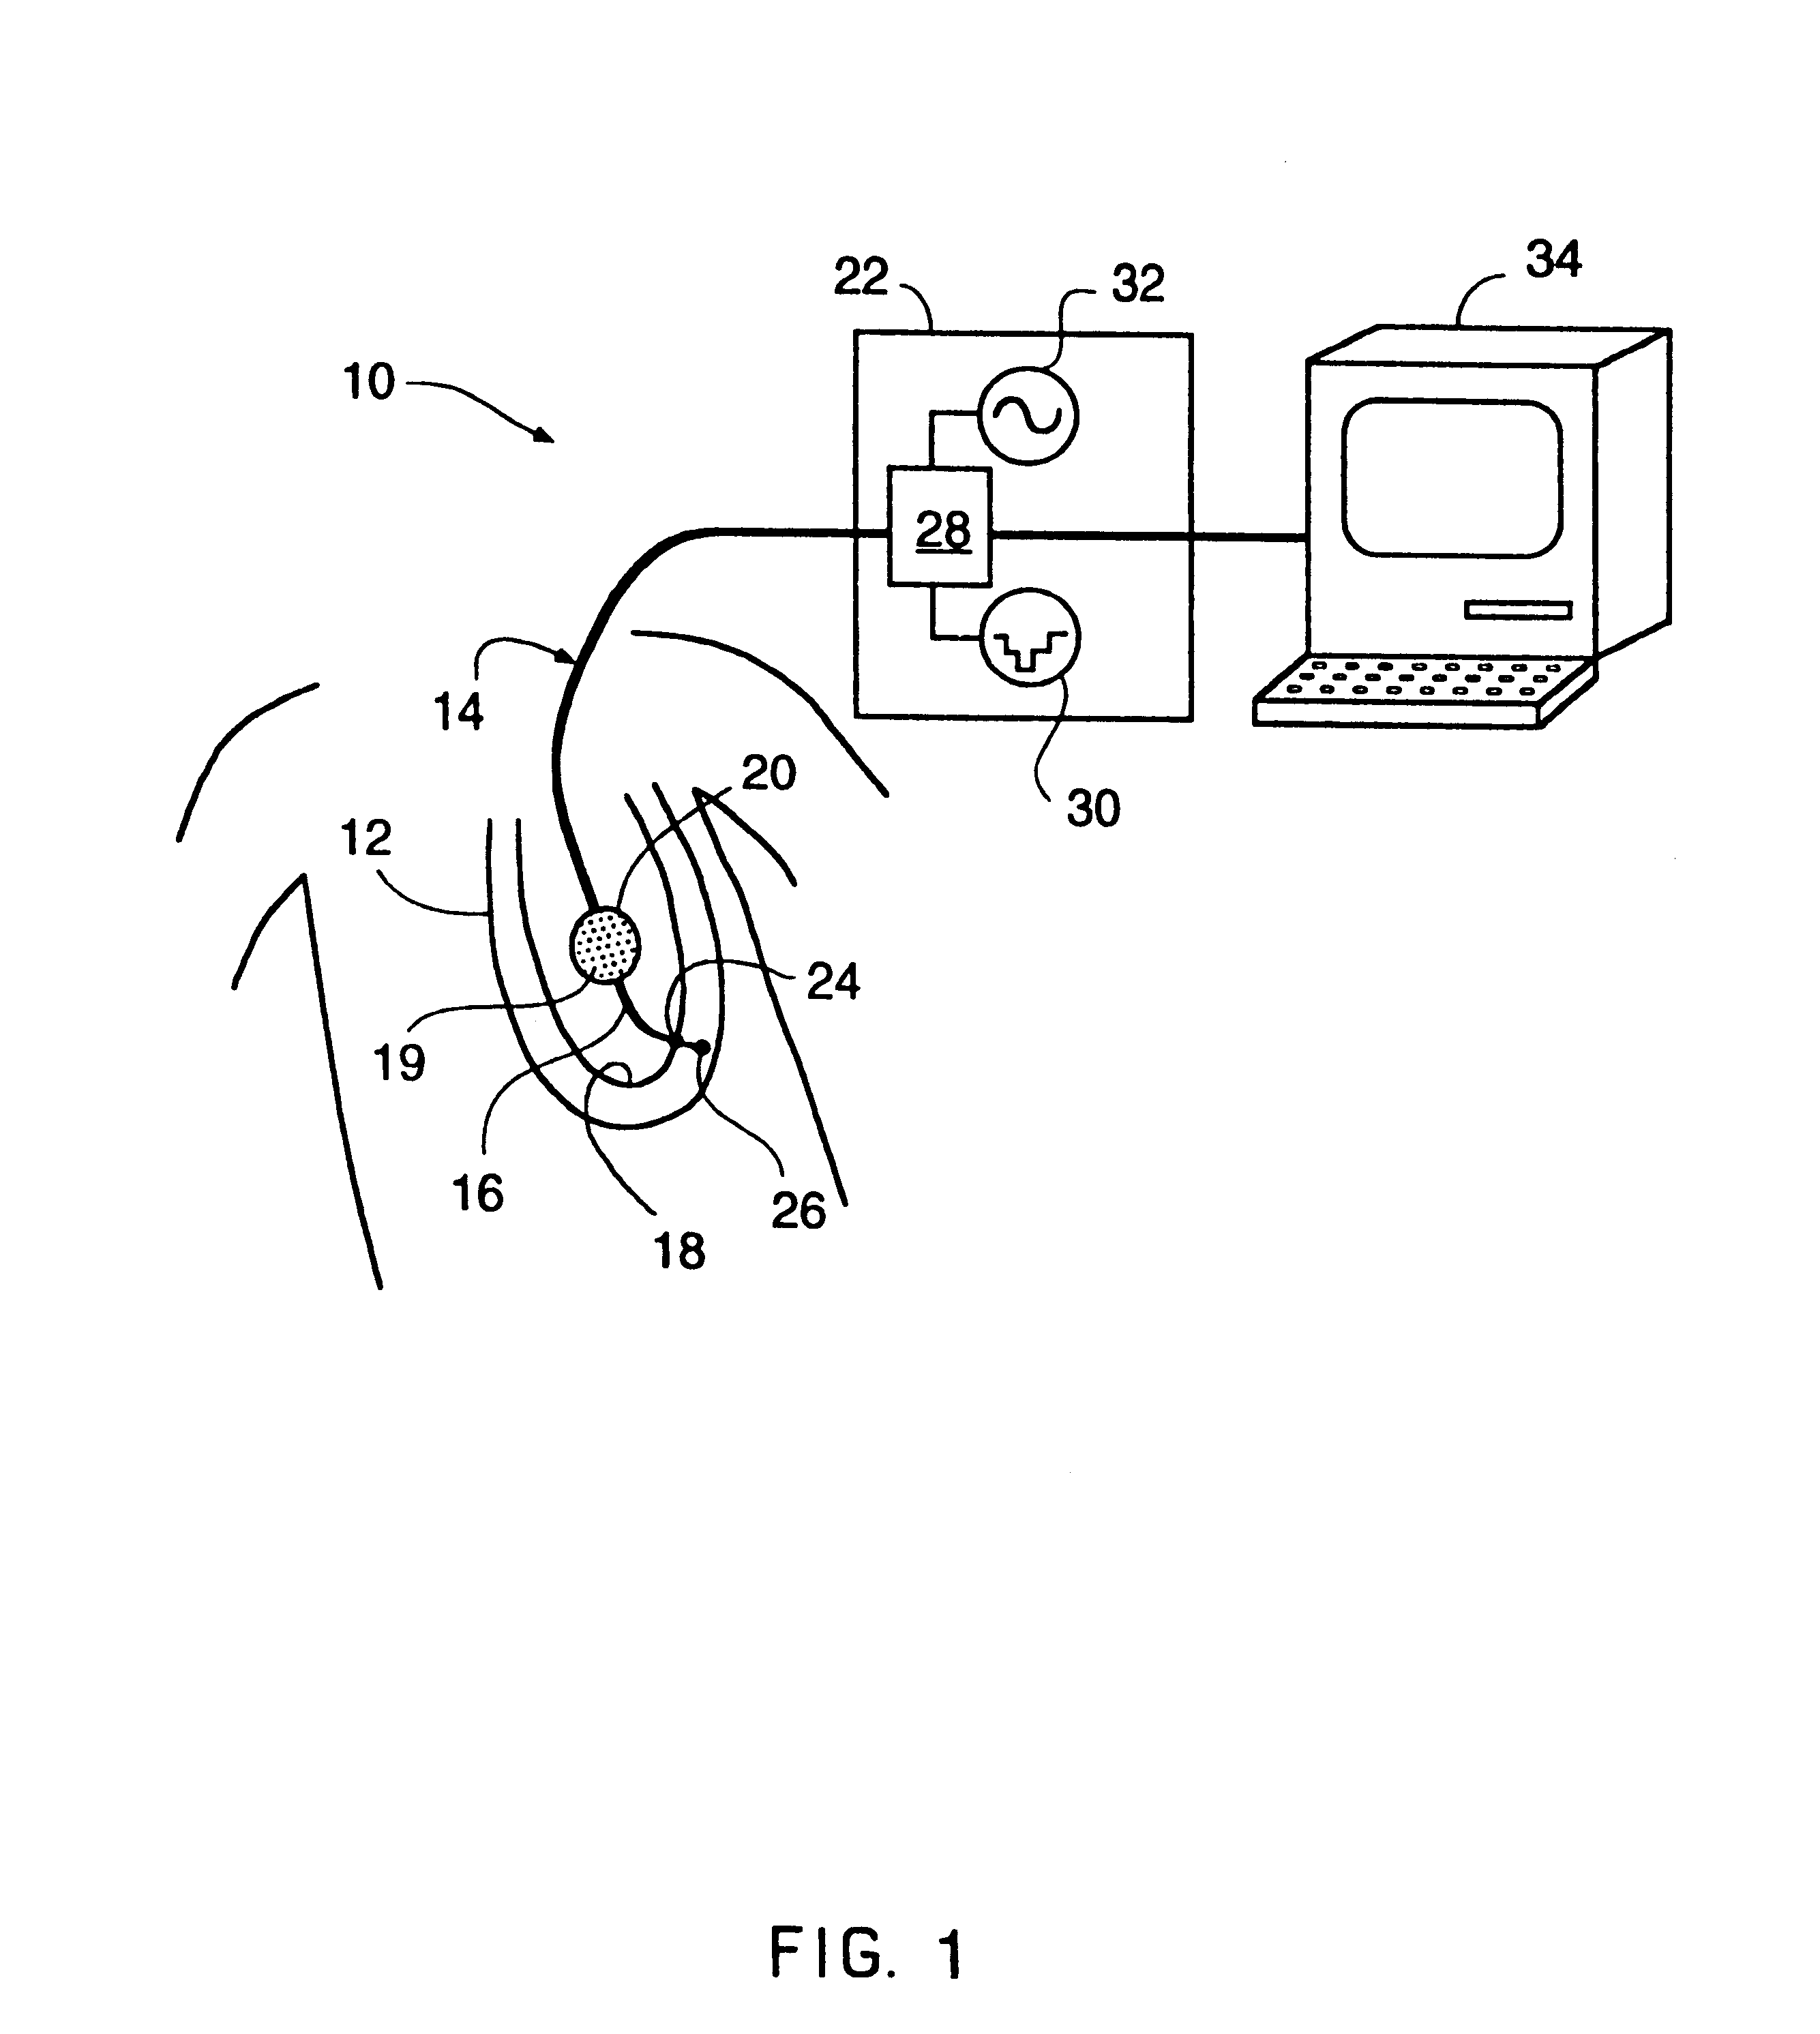 Method of construction an endocardial mapping catheter